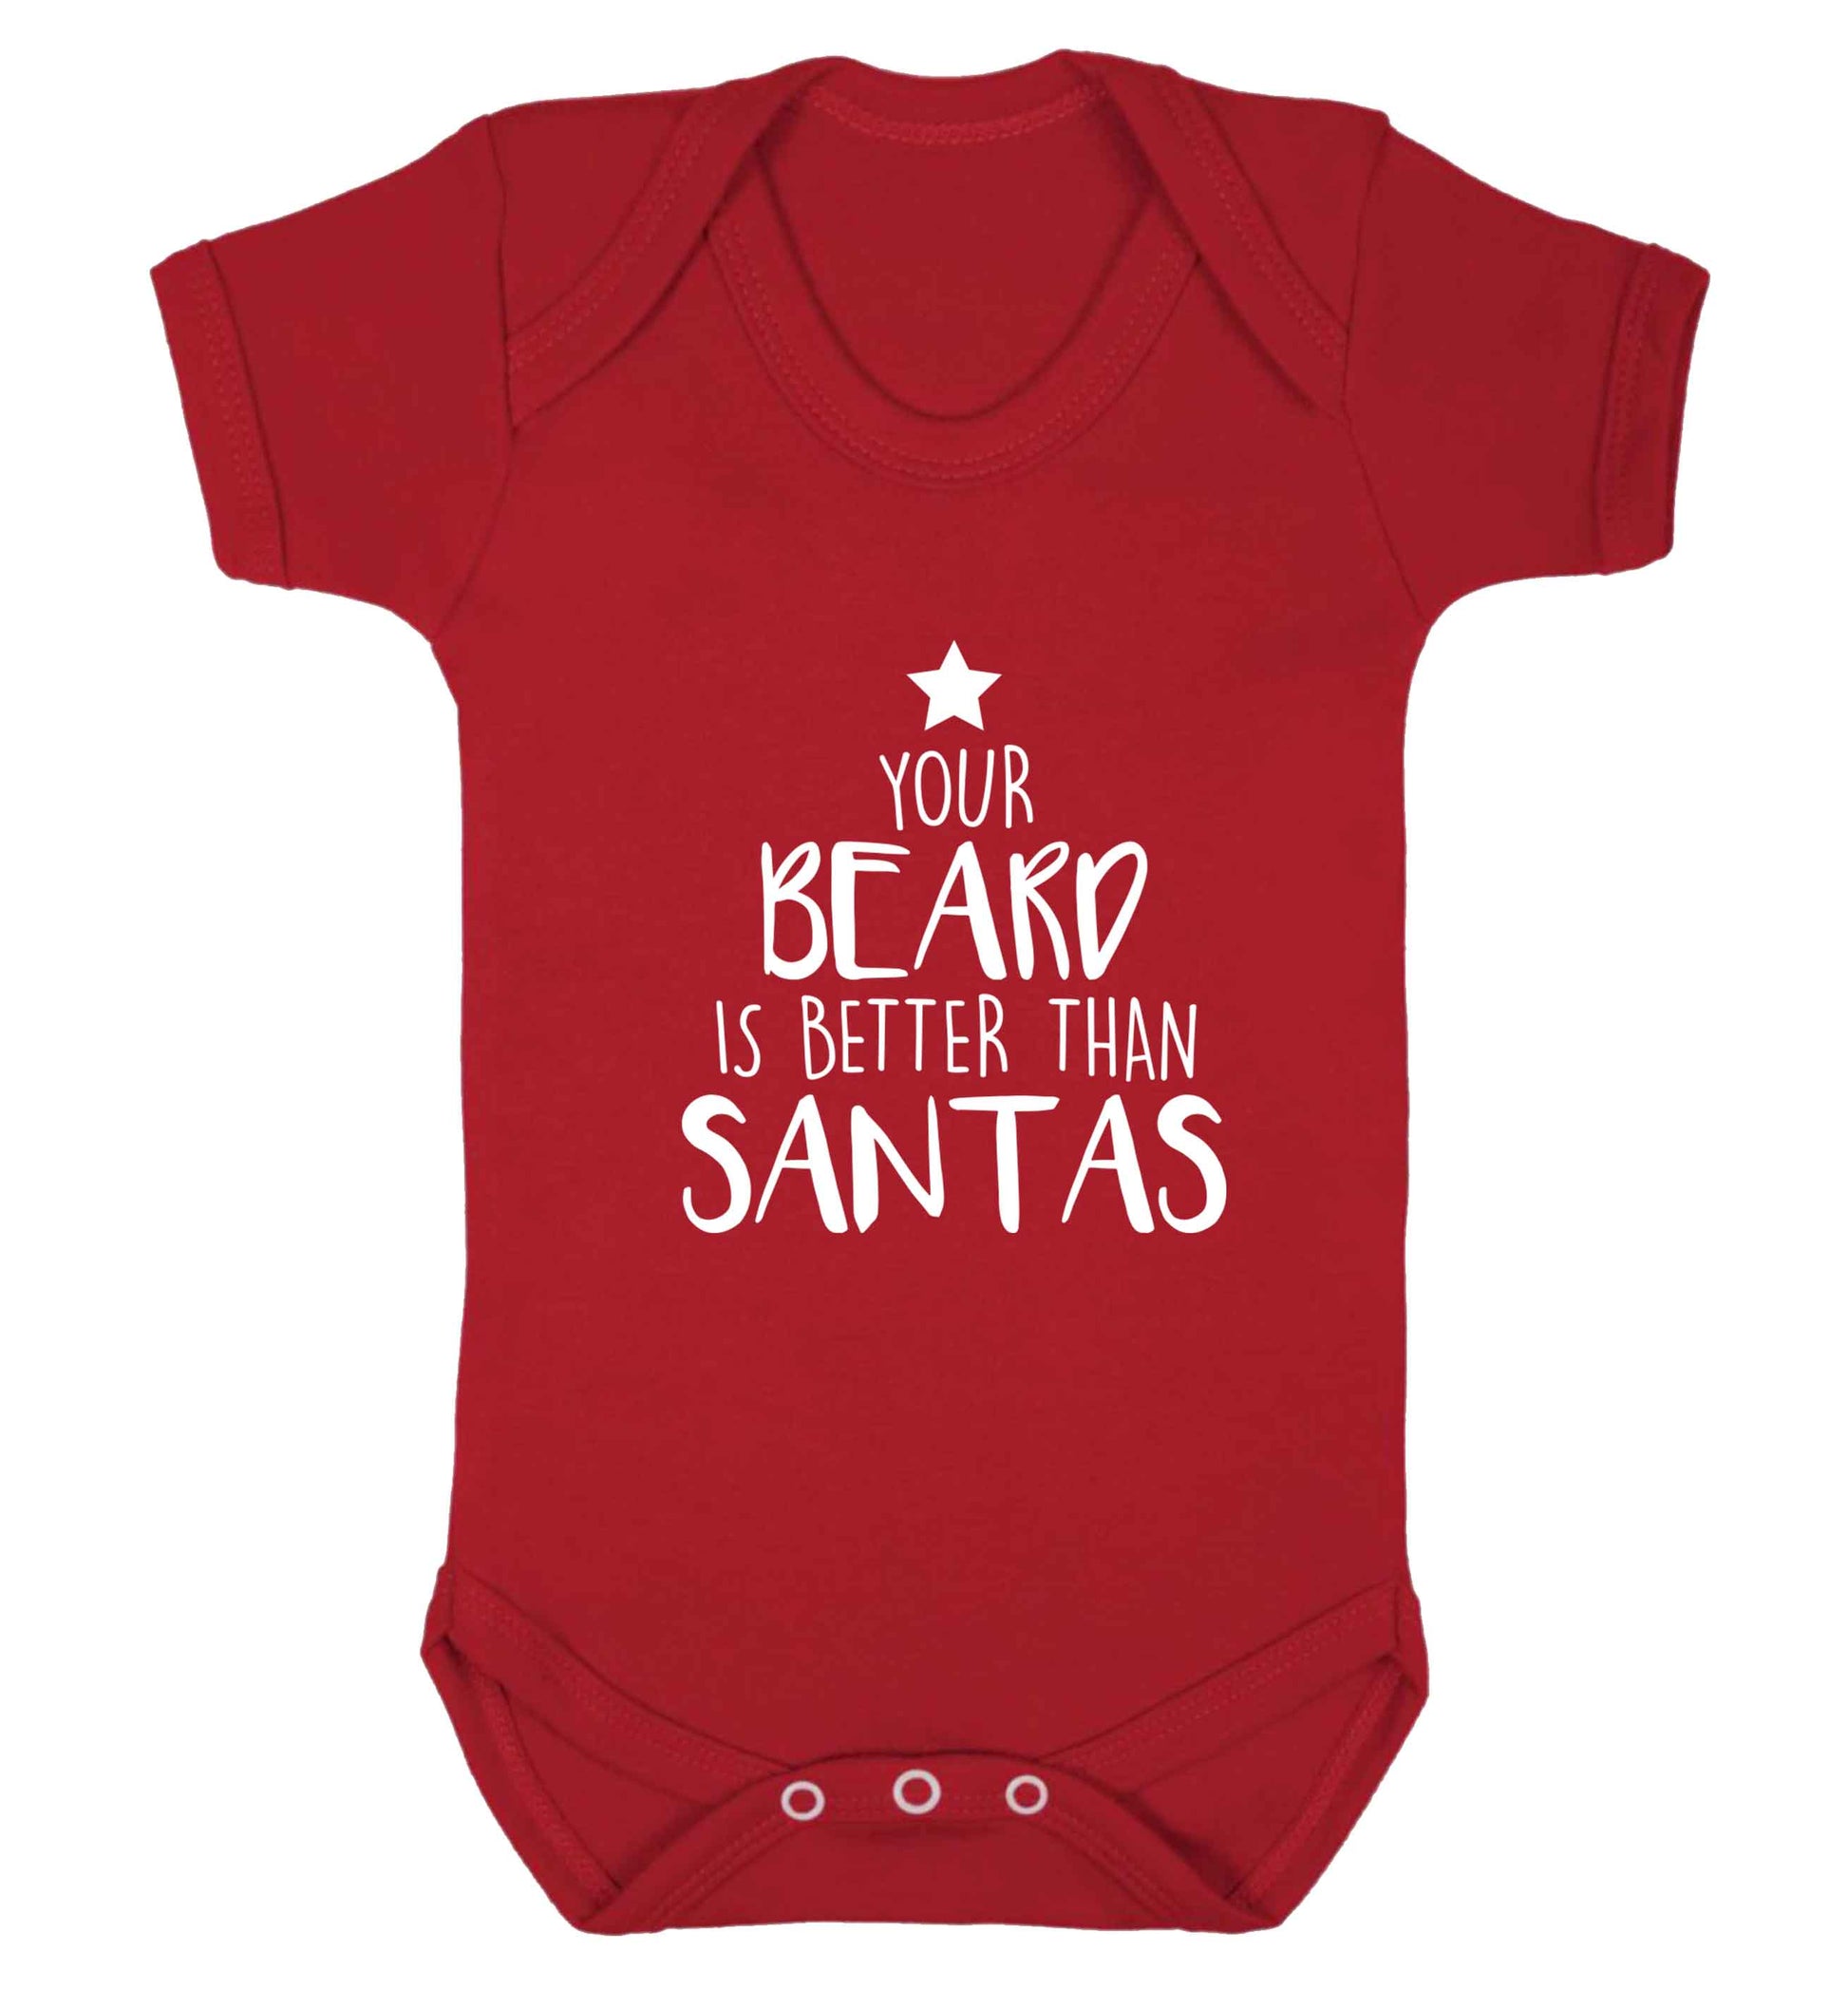 Your Beard Better than Santas baby vest red 18-24 months